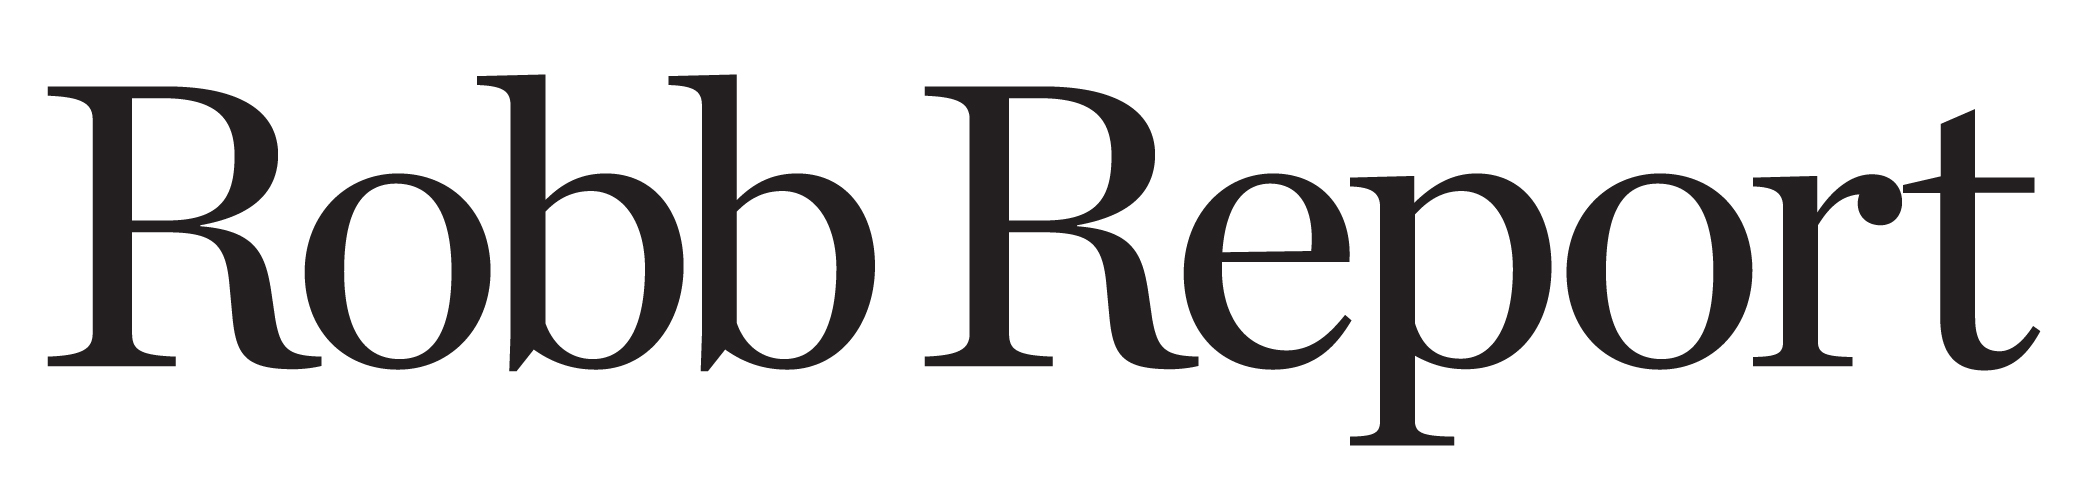 The Robb  Report